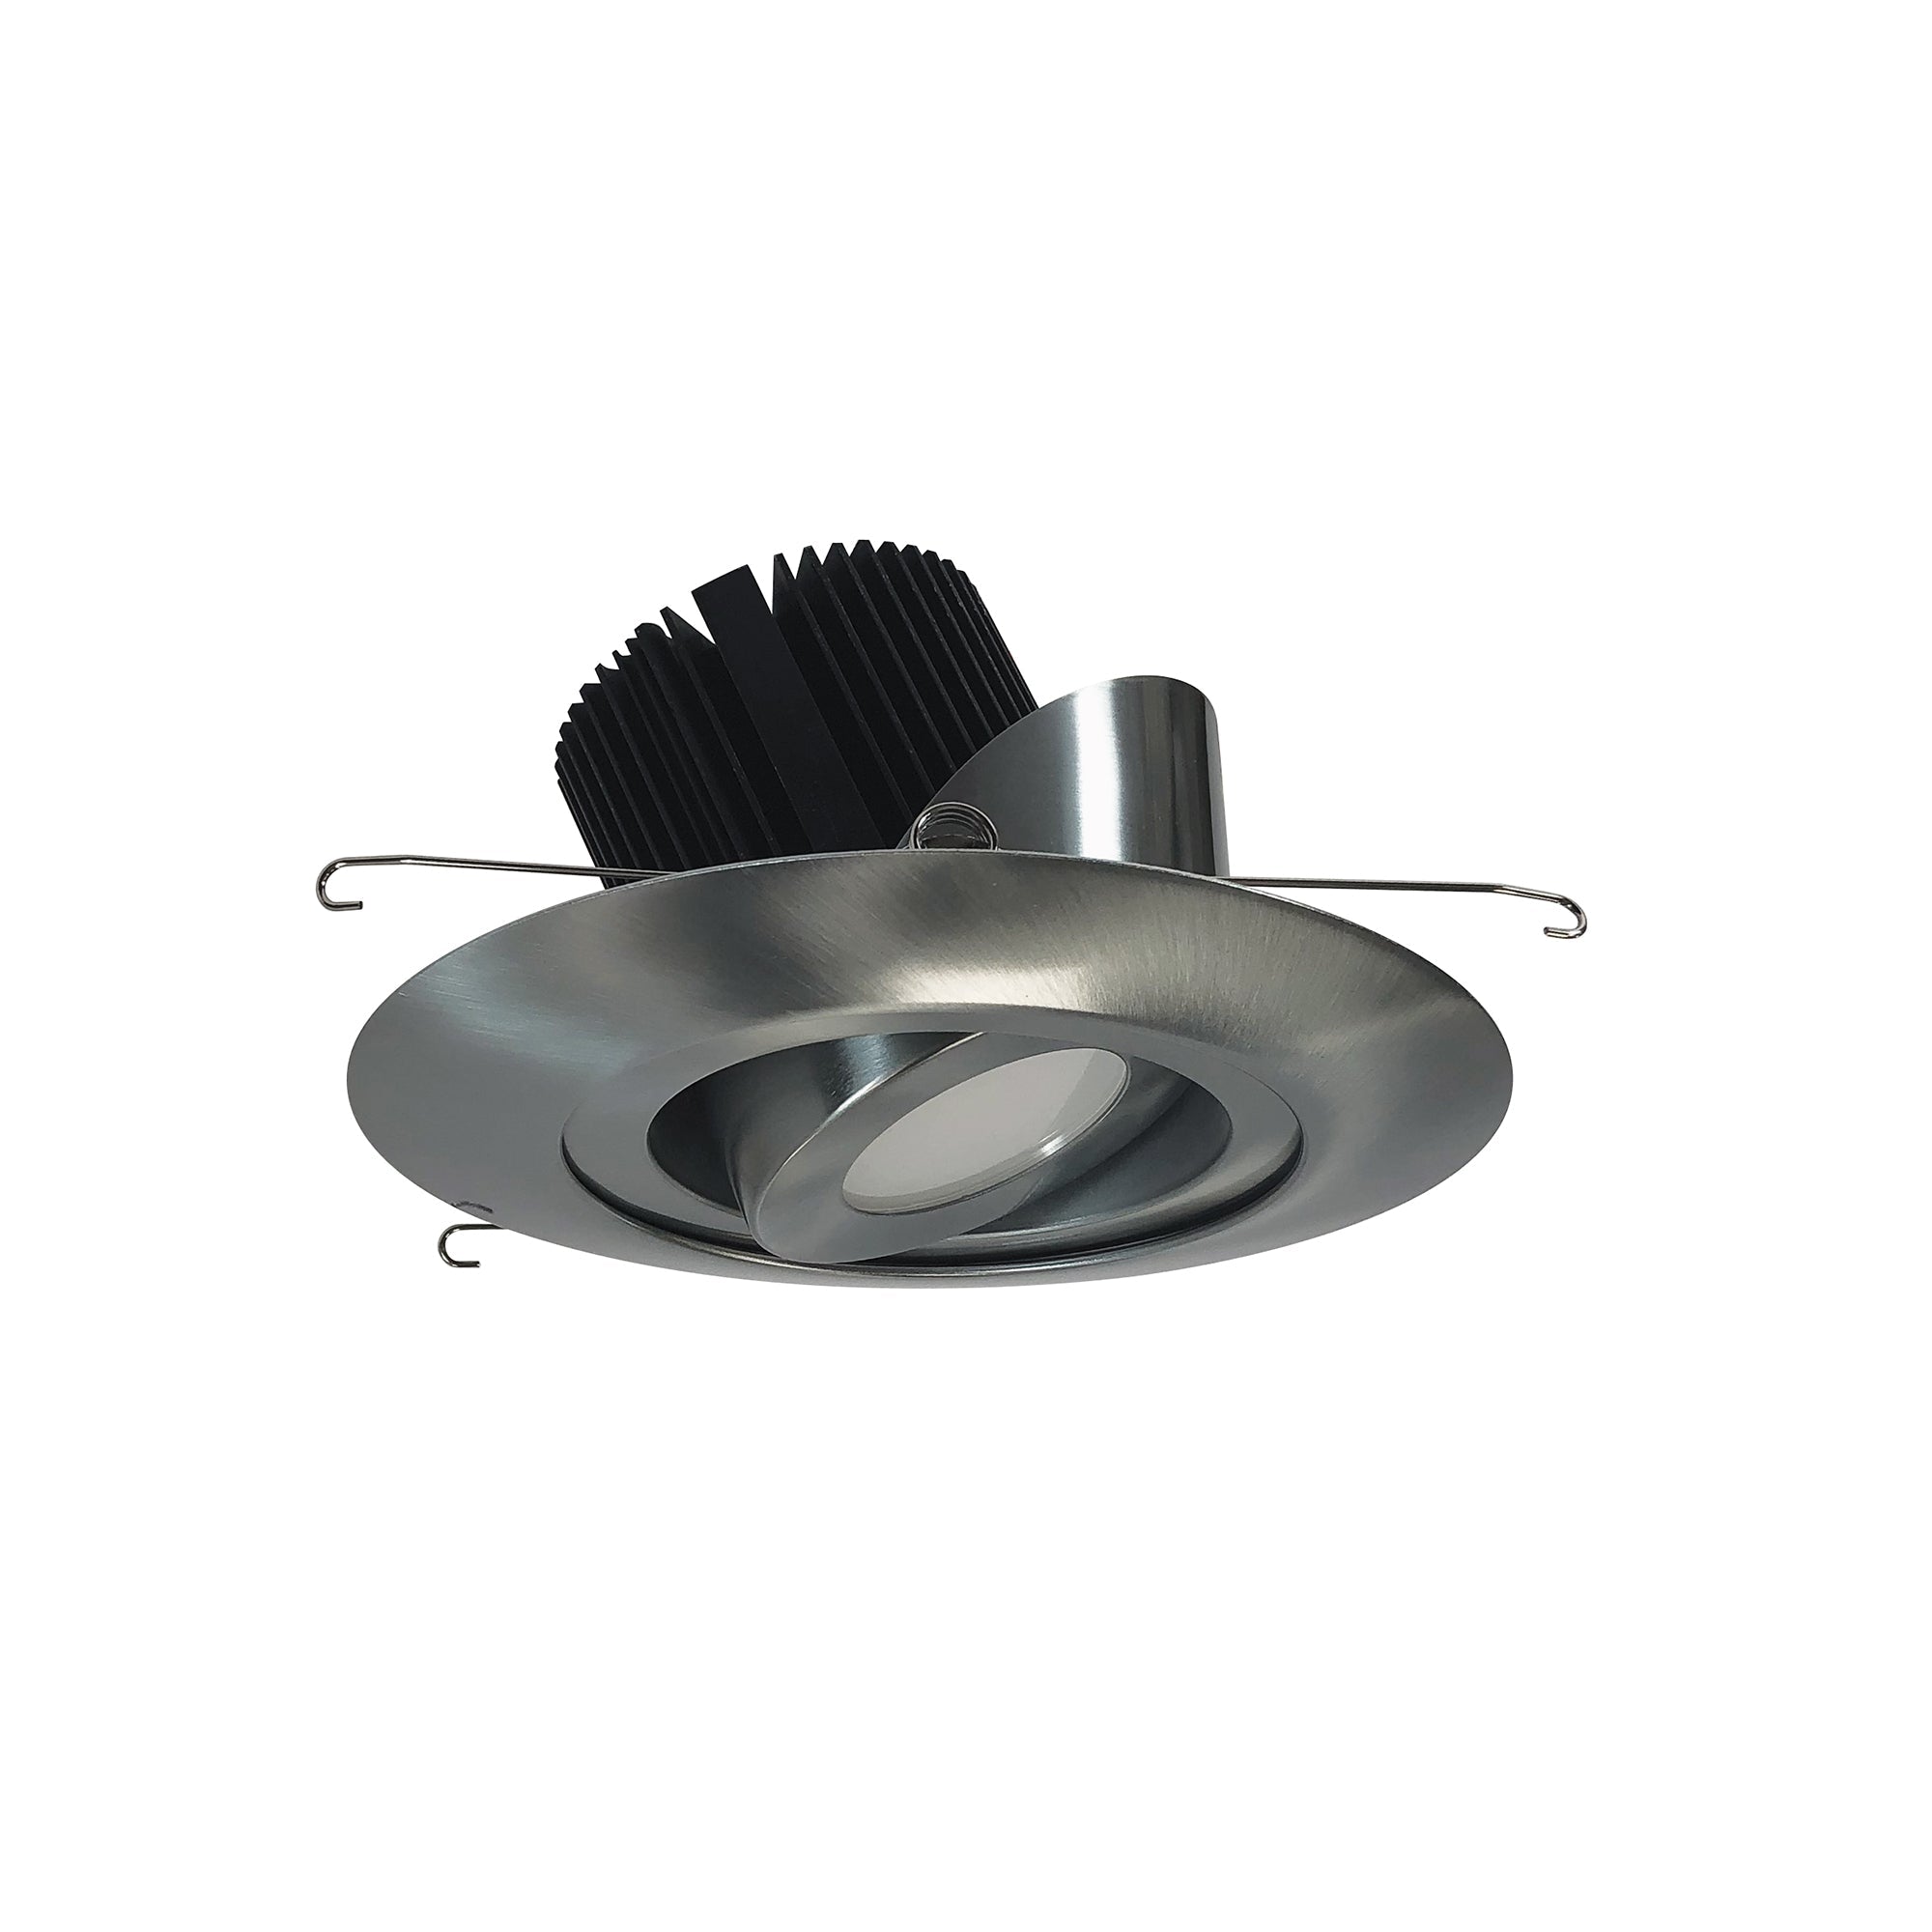 Nora Lighting NRM2-614L2535FNN - Recessed - 6 Inch Marquise II Round Surface Adjustable Trim, Flood, 2500lm, 3500K, Natural Metal (Not Compatible with NHRM2-625 Housings)